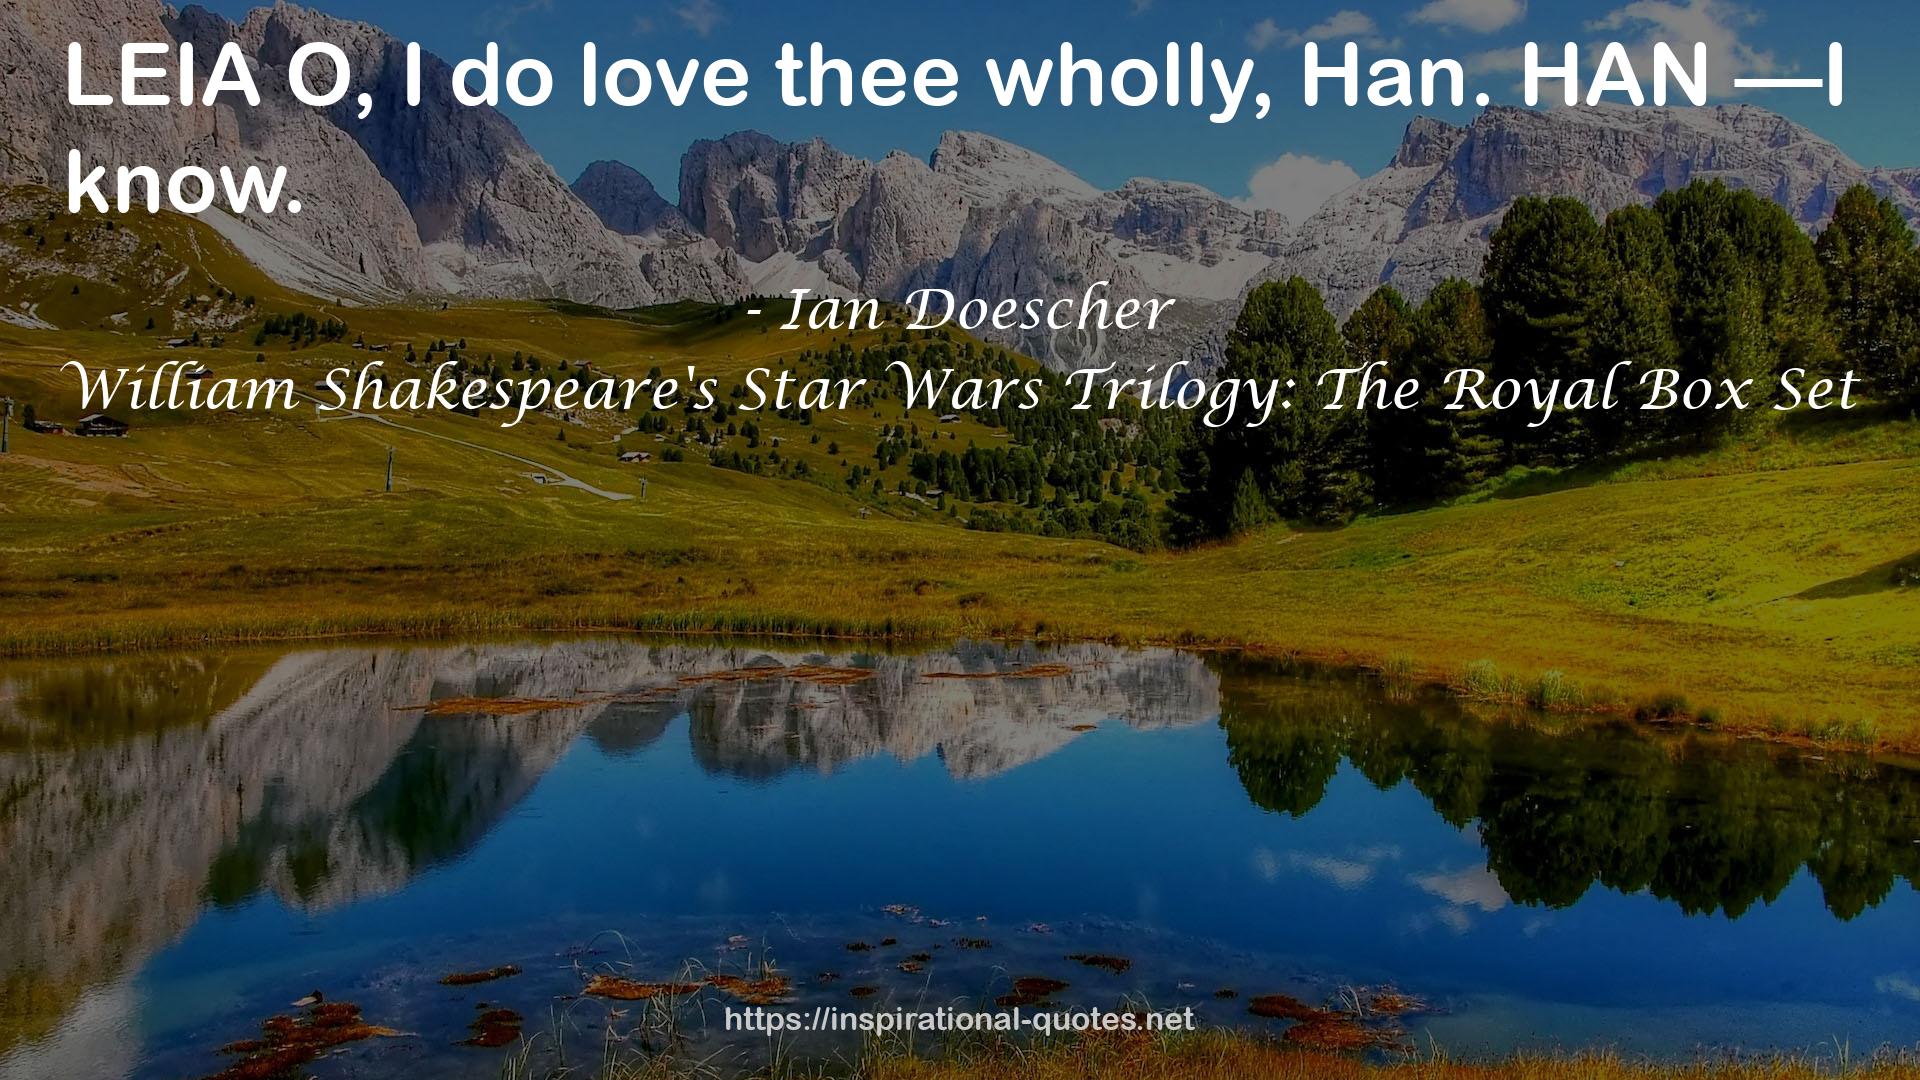 William Shakespeare's Star Wars Trilogy: The Royal Box Set QUOTES